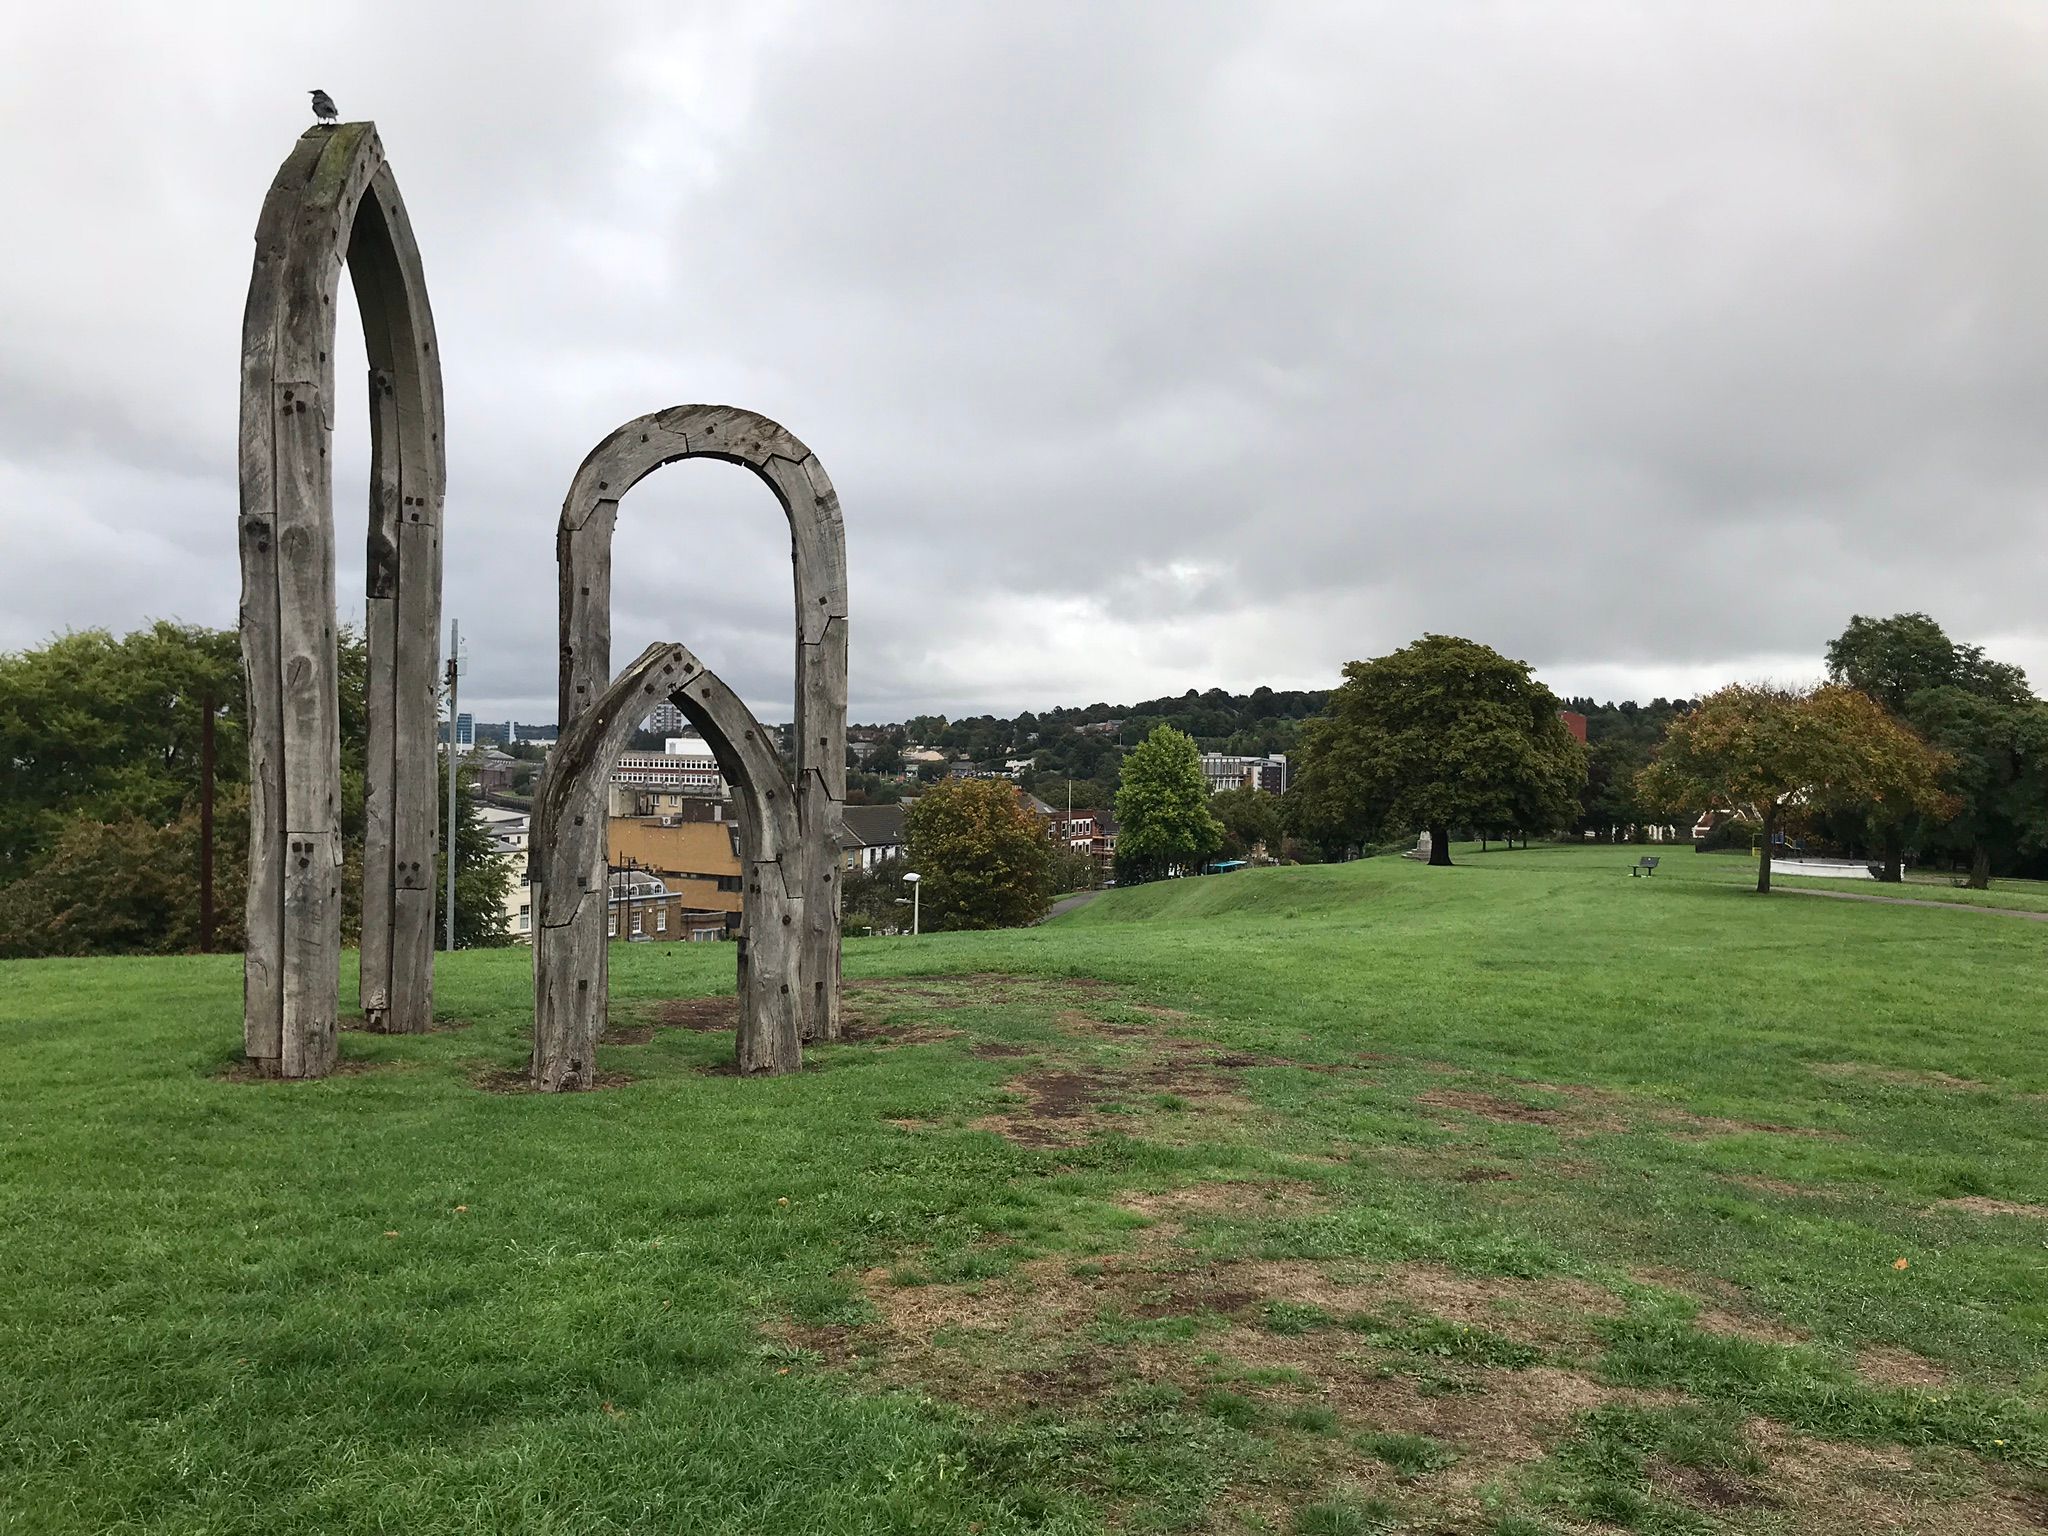 The scultpural wooden arches that look out over Fort Pitt Hill at Victoria Gardens